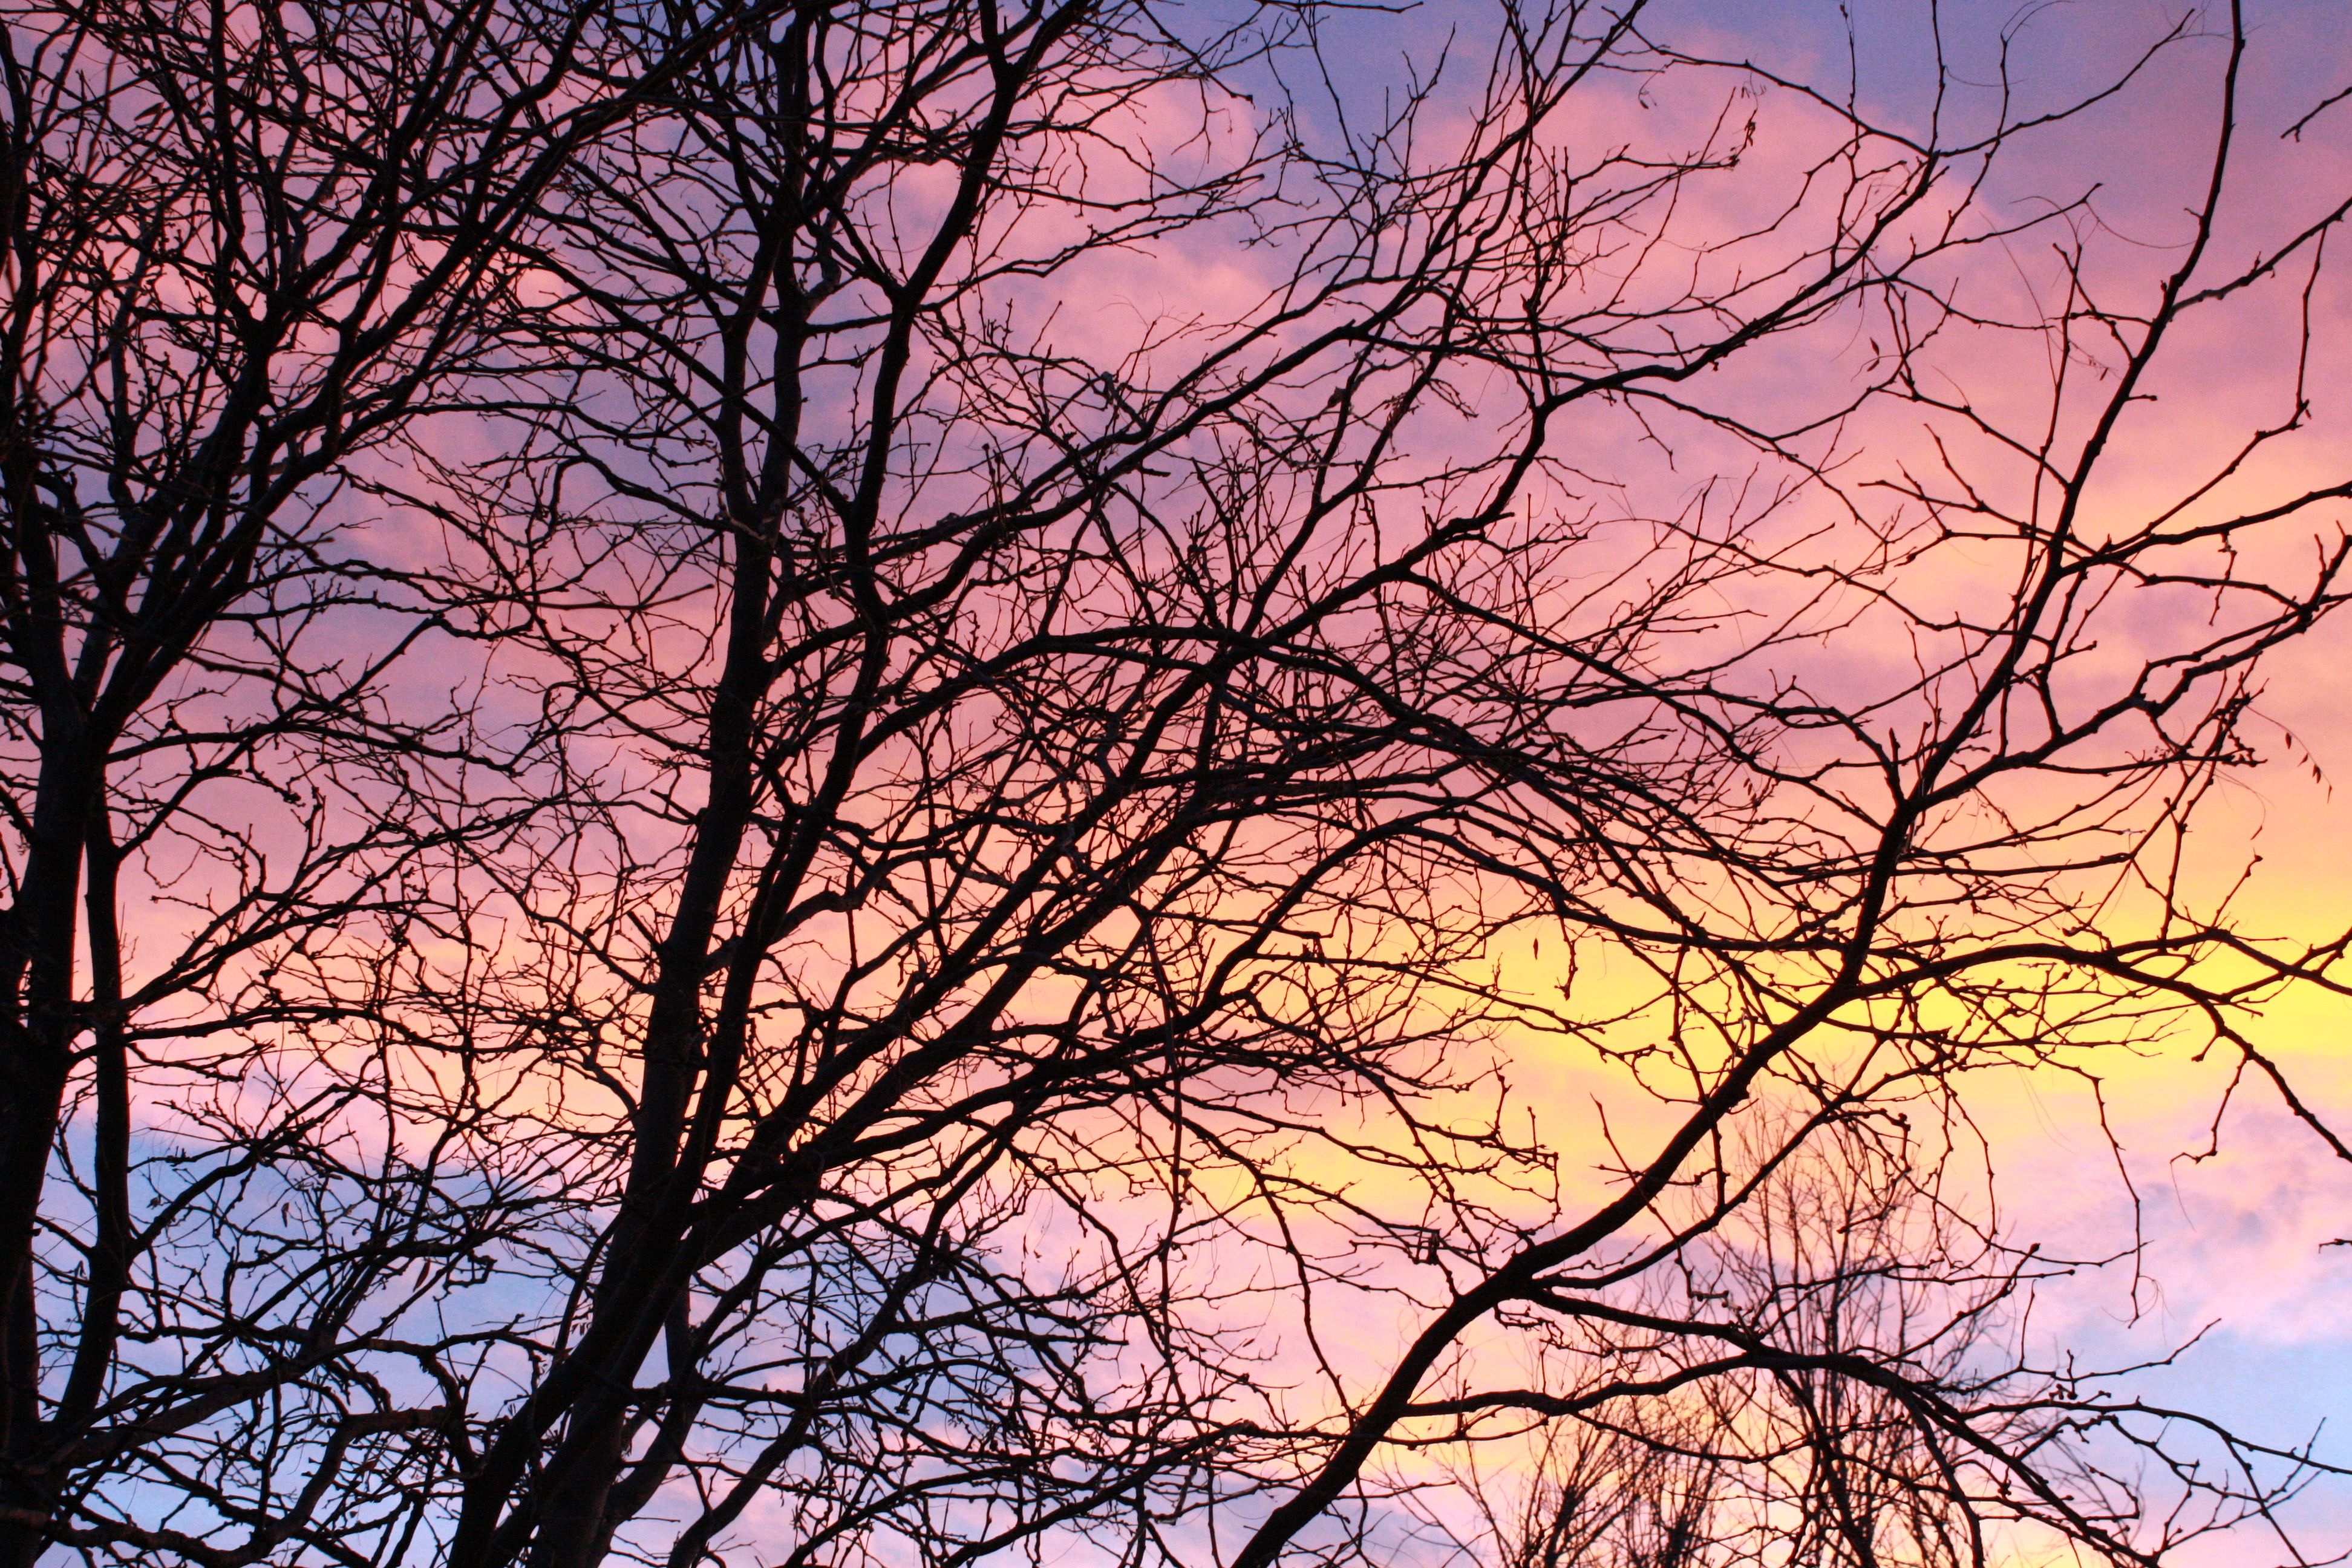 Pastel Sunset Through Tree Branches Picture | Free Photograph ...